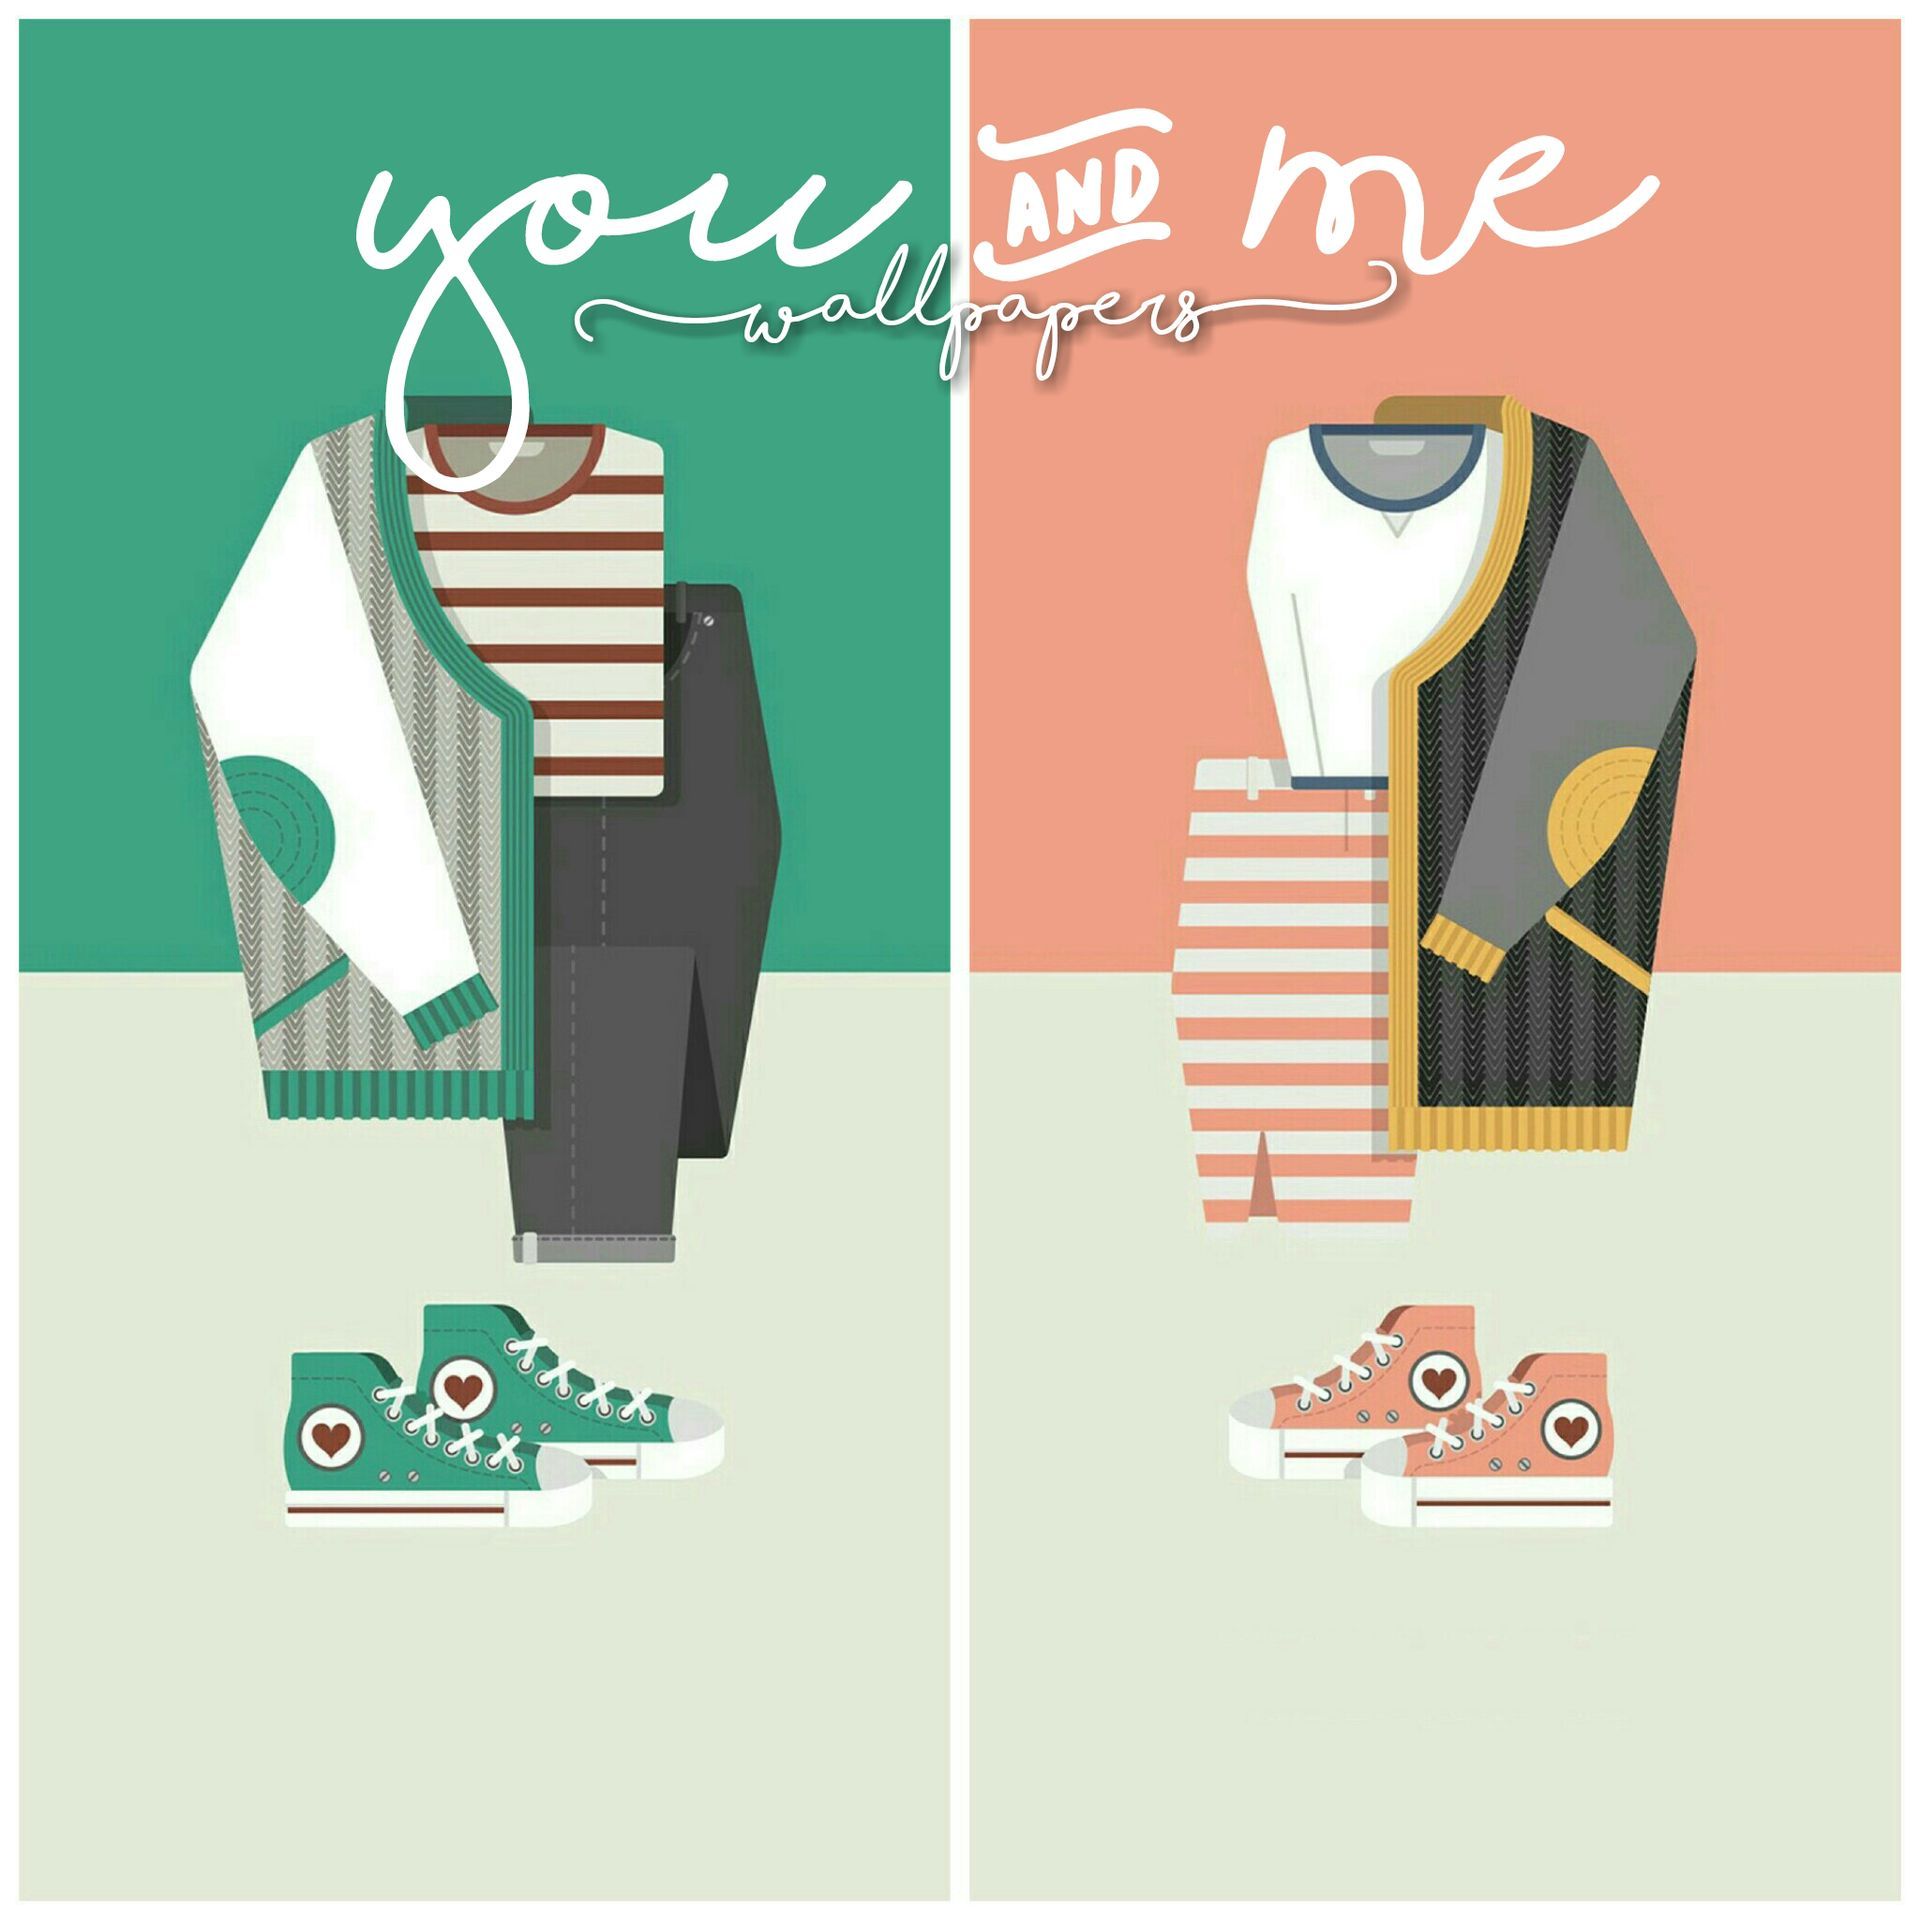 For Covers] - [Wallpaper.. You & Me]